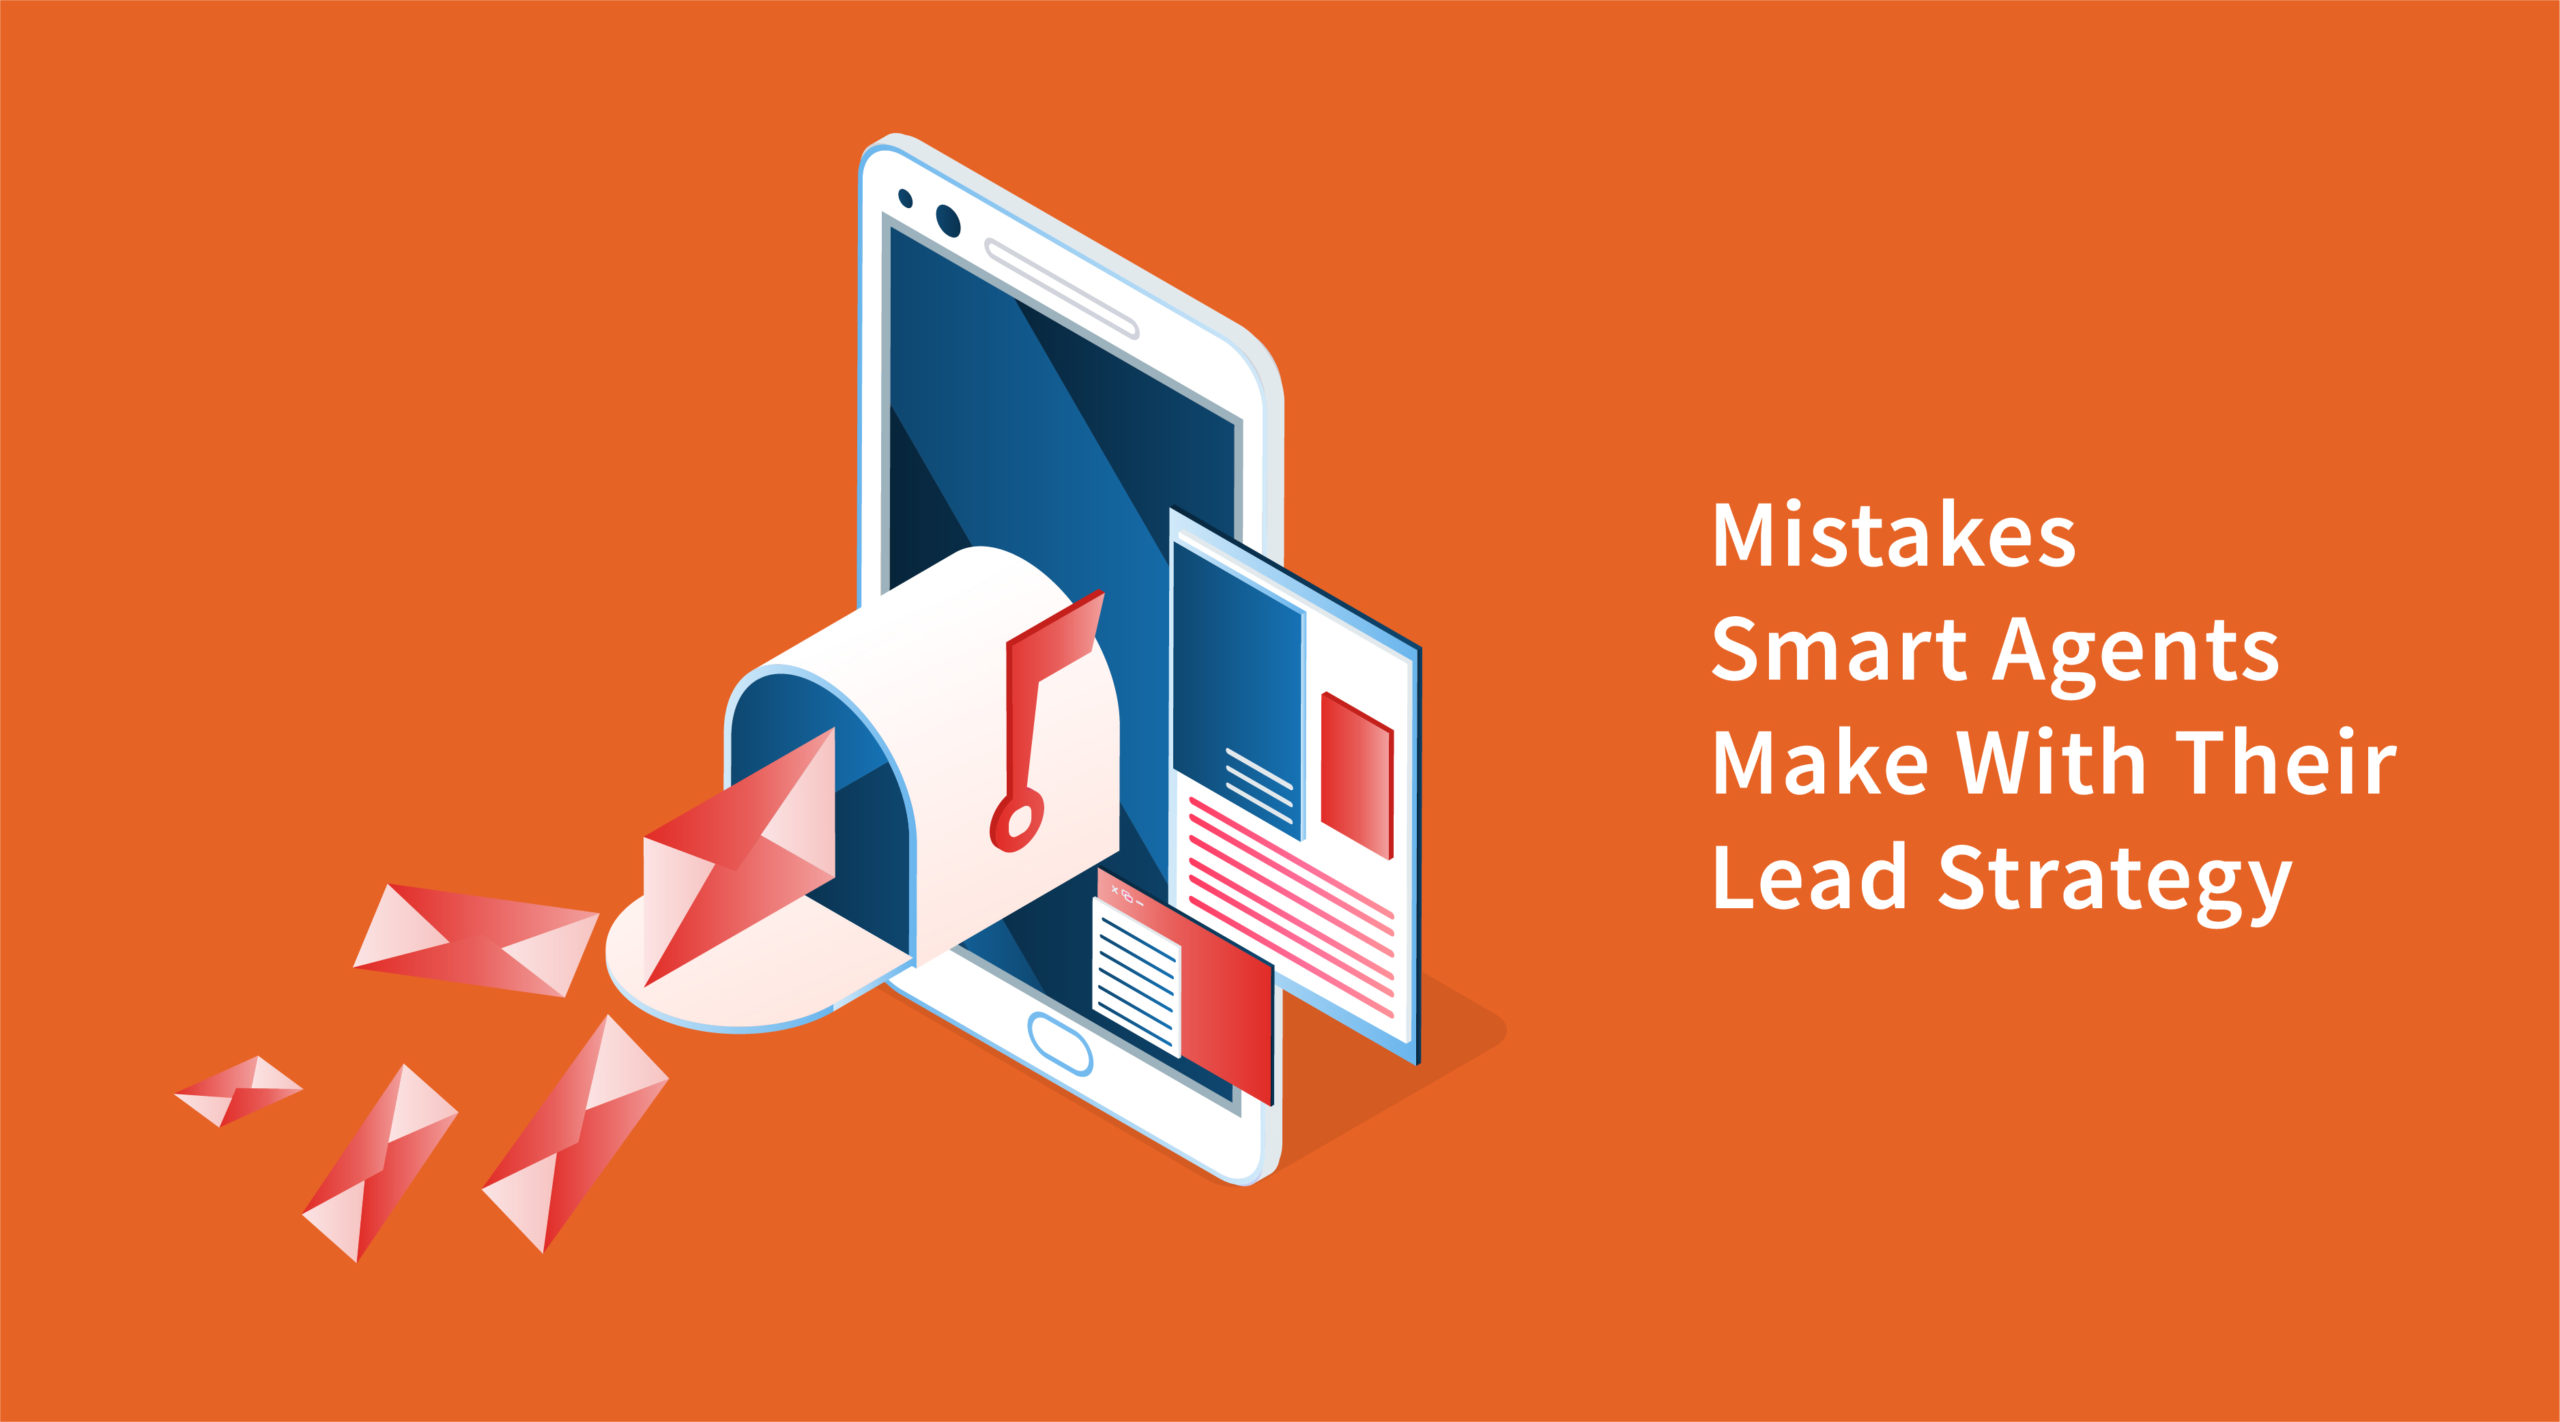 Top 4 Mistakes Smart Agents Make With Their Lead Strategy